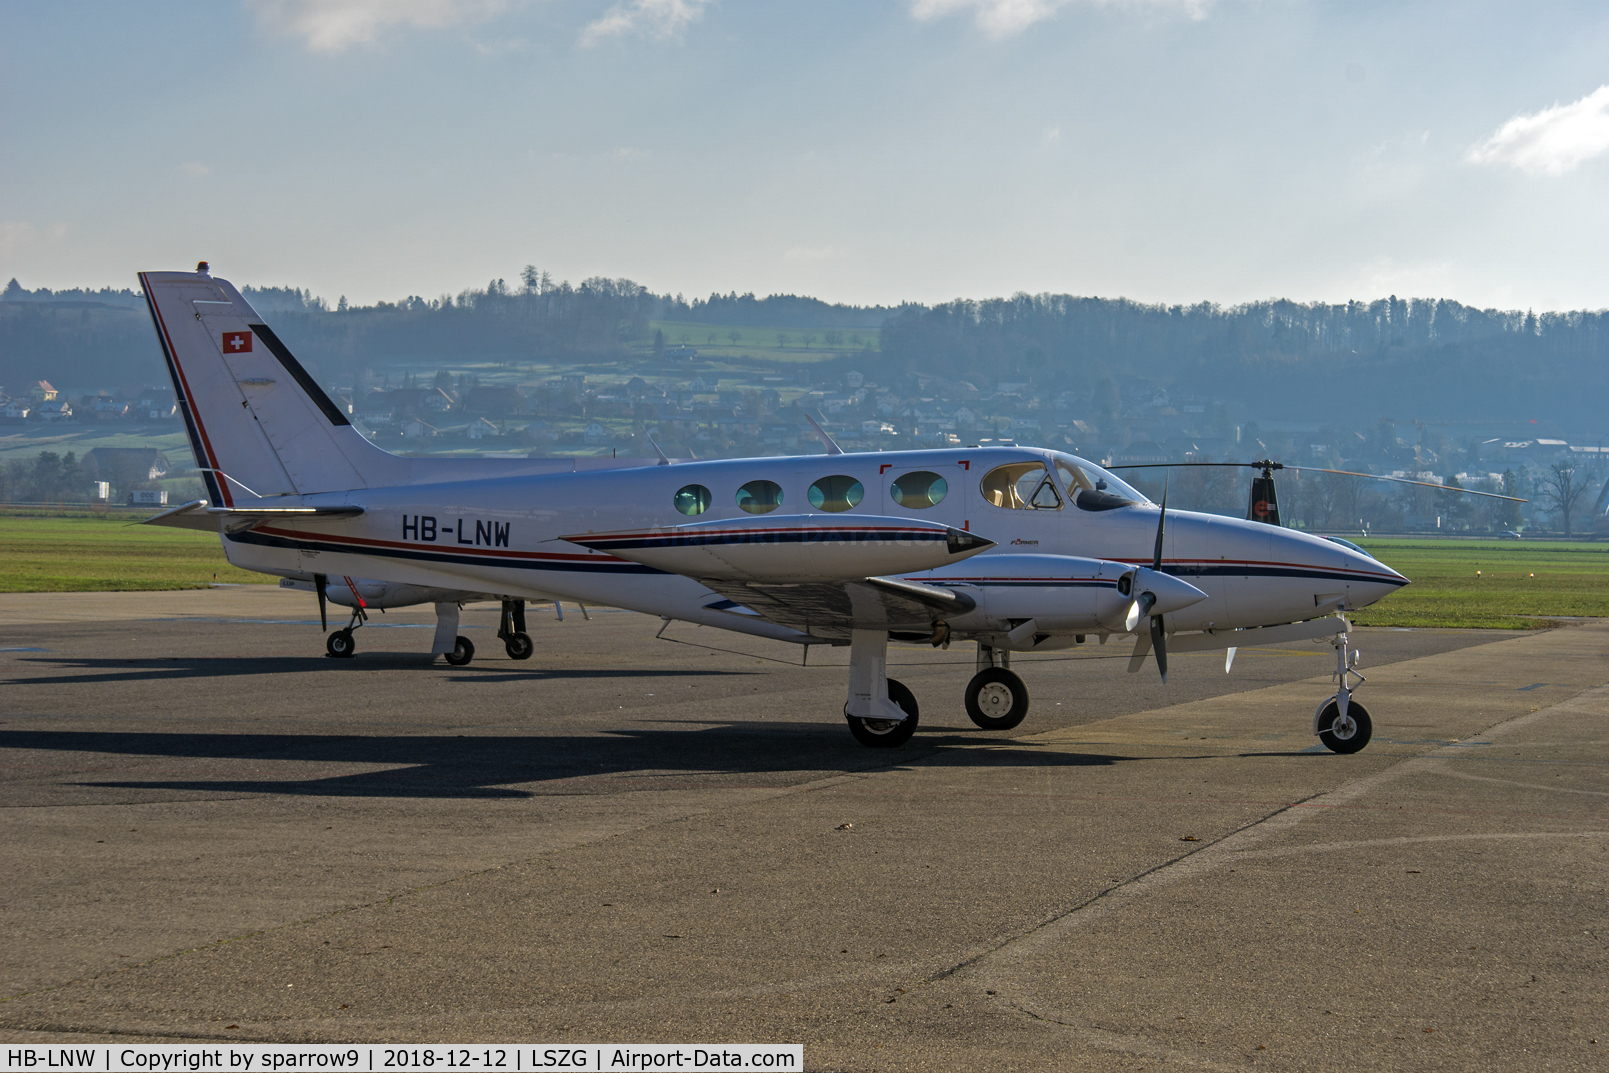 HB-LNW, 1981 Cessna 340A C/N 340A1223, At Grenchen after refurbishment and HB-registered again 2018-12-05. It was on the Swiss register from 1983-06-23 until 1988-07-26.